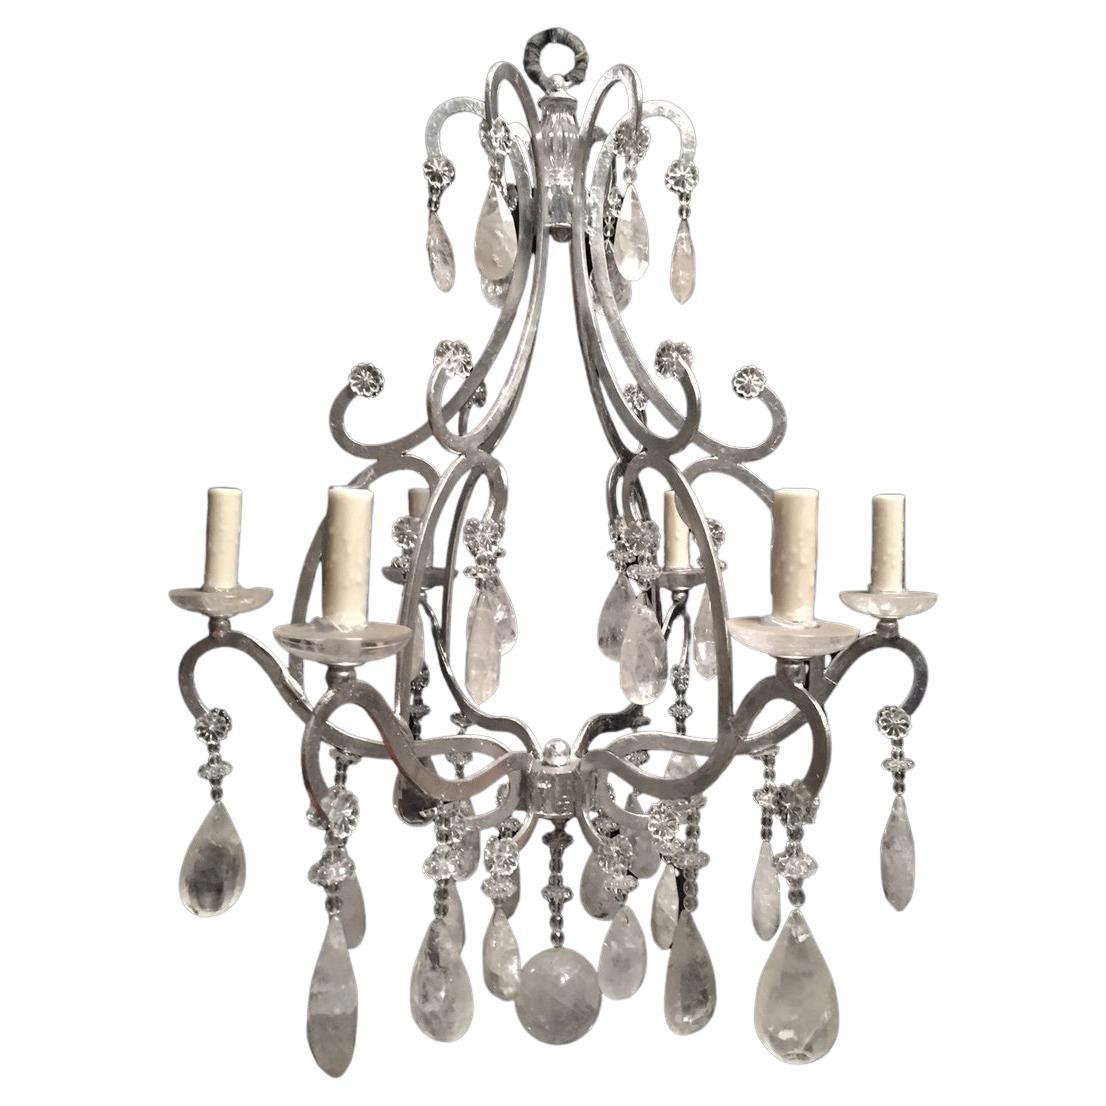 Beautiful hand forged wrought iron and Rock Crystal 6 Light Chandelier with Rock Crystal Bobesches.
Wired for American and European Market.
Comes with 3 foot chain and canopy